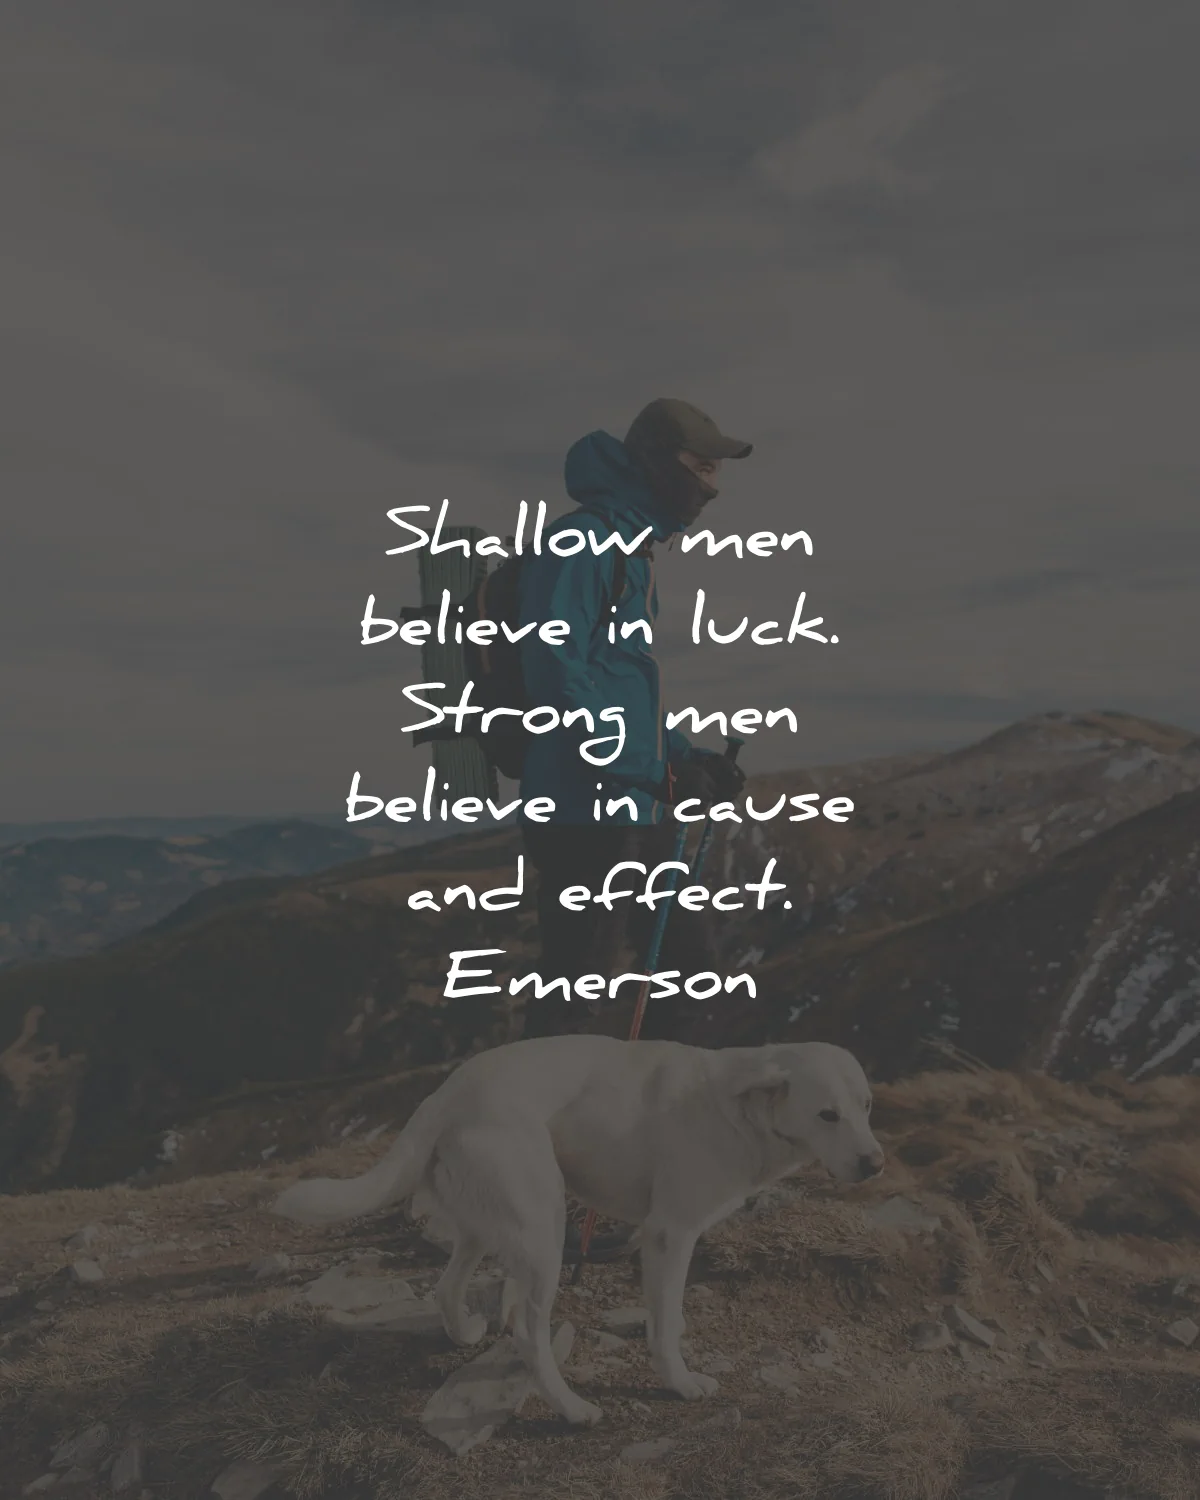 strength quotes shallow men believe luck cause effect emerson wisdom